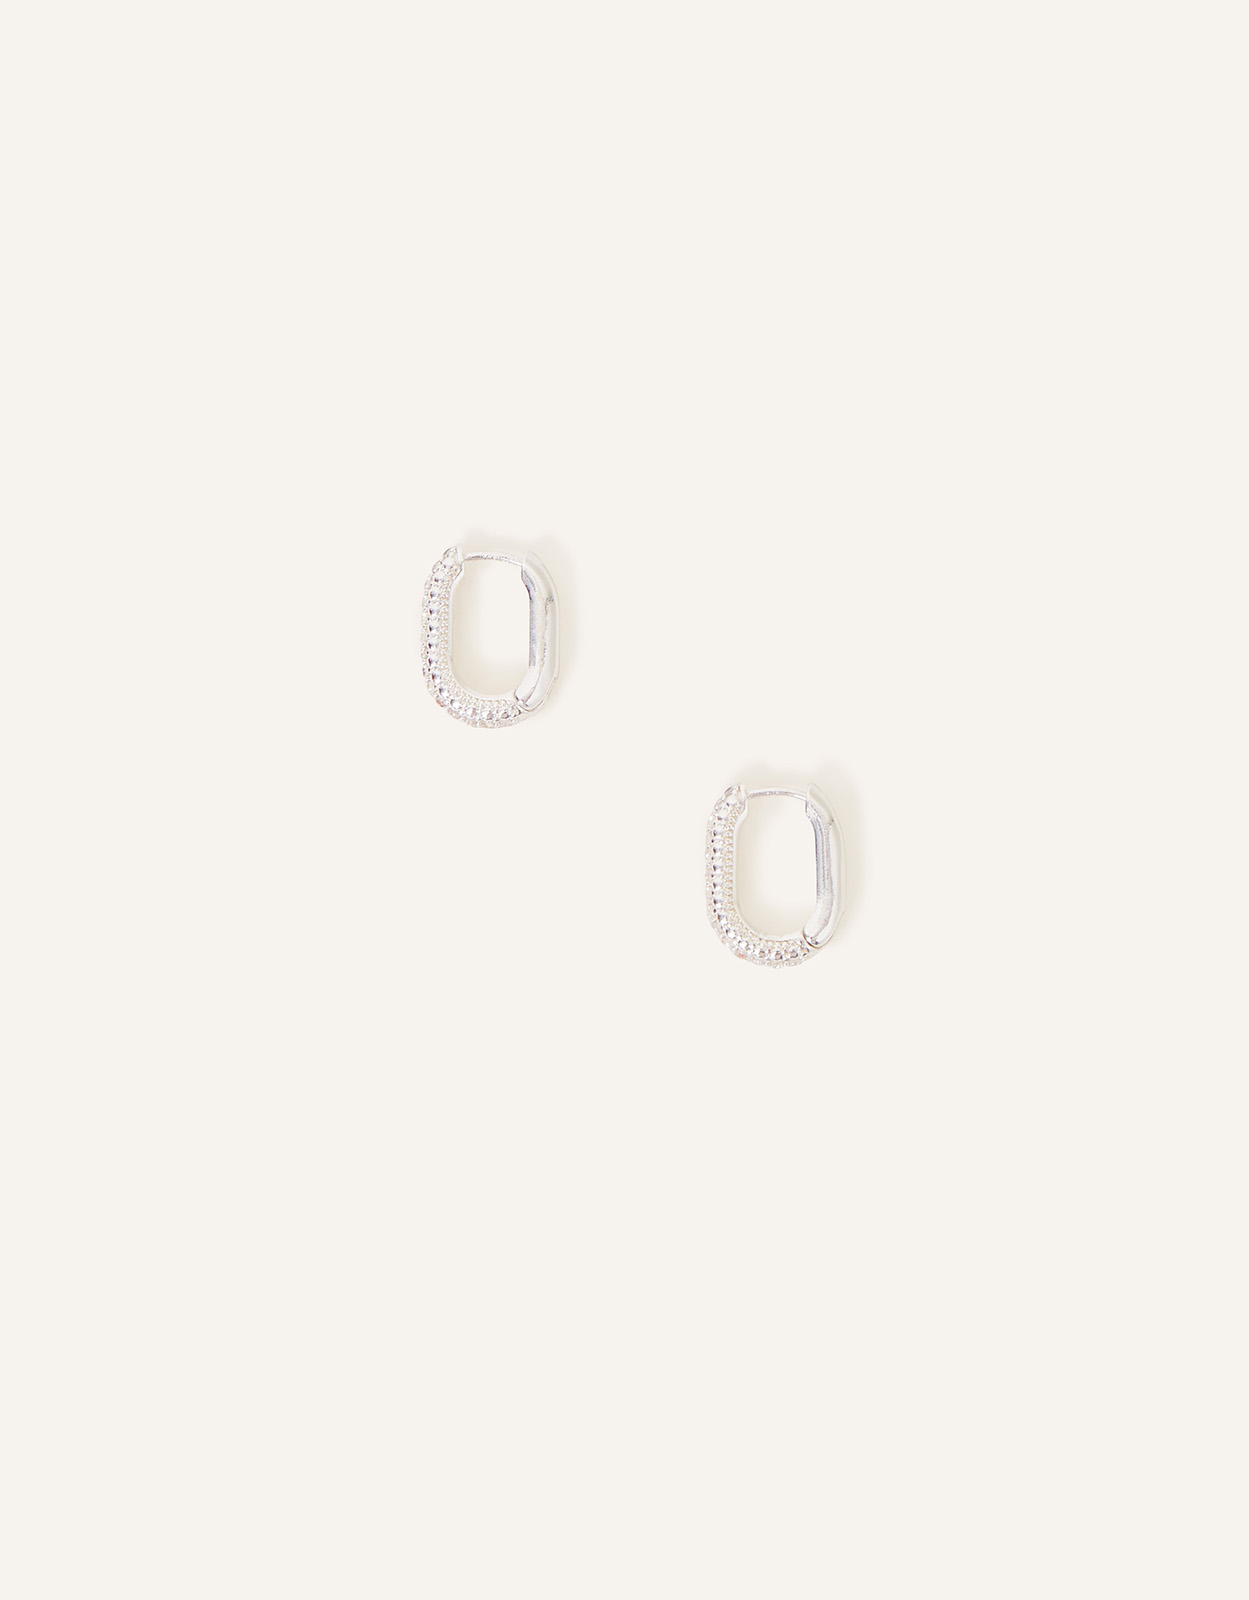 Accessorize Women's Sterling Silver-Plated Oval Hoops